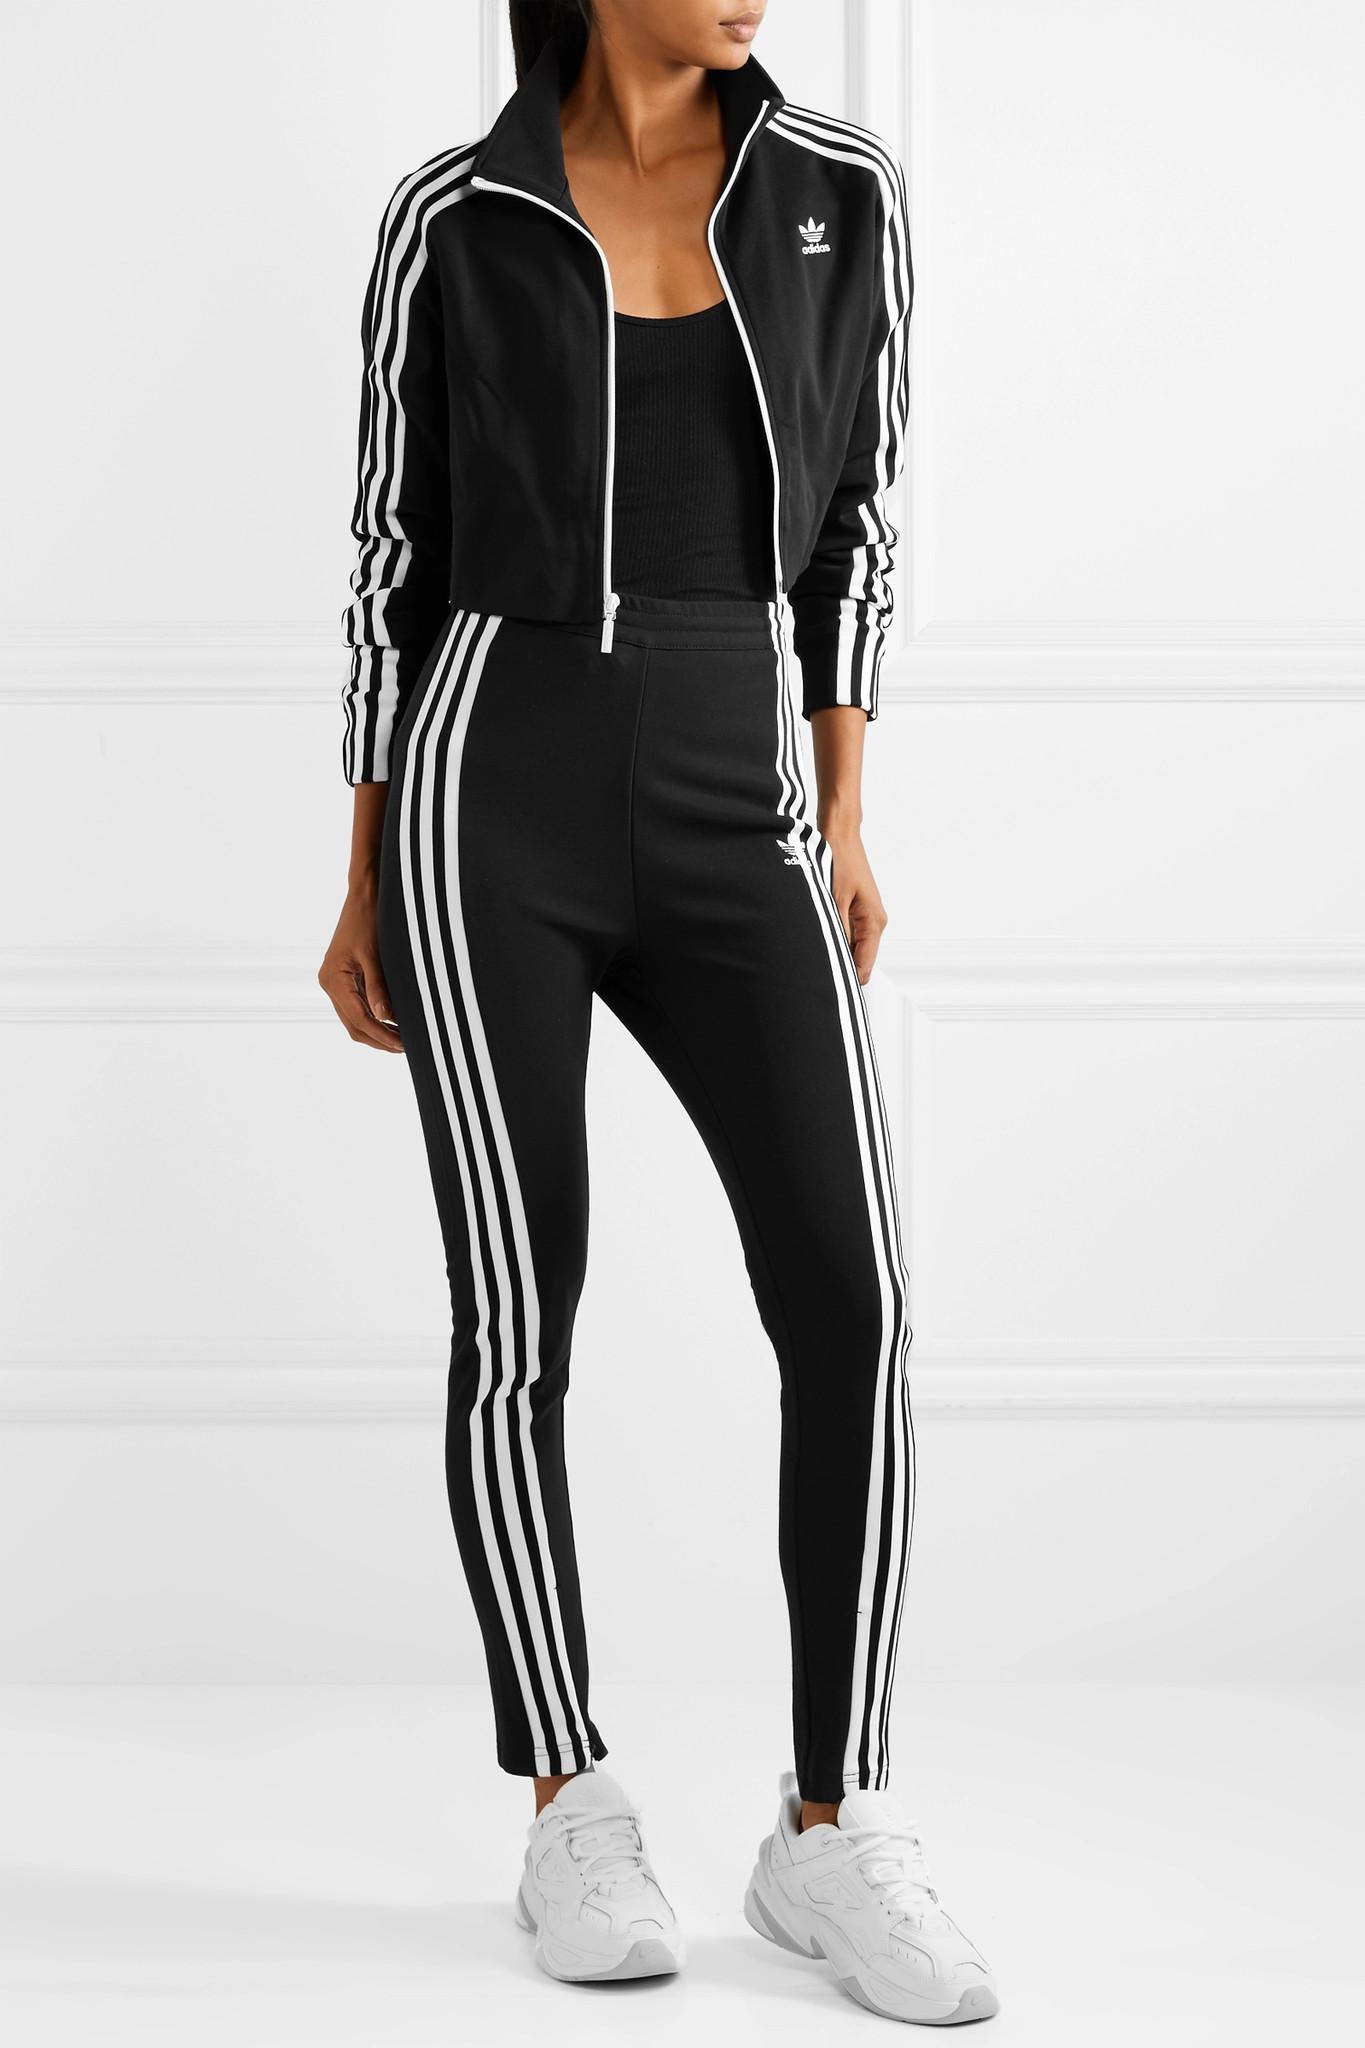 adidas Originals Striped Jersey Track Pants in Black - Lyst